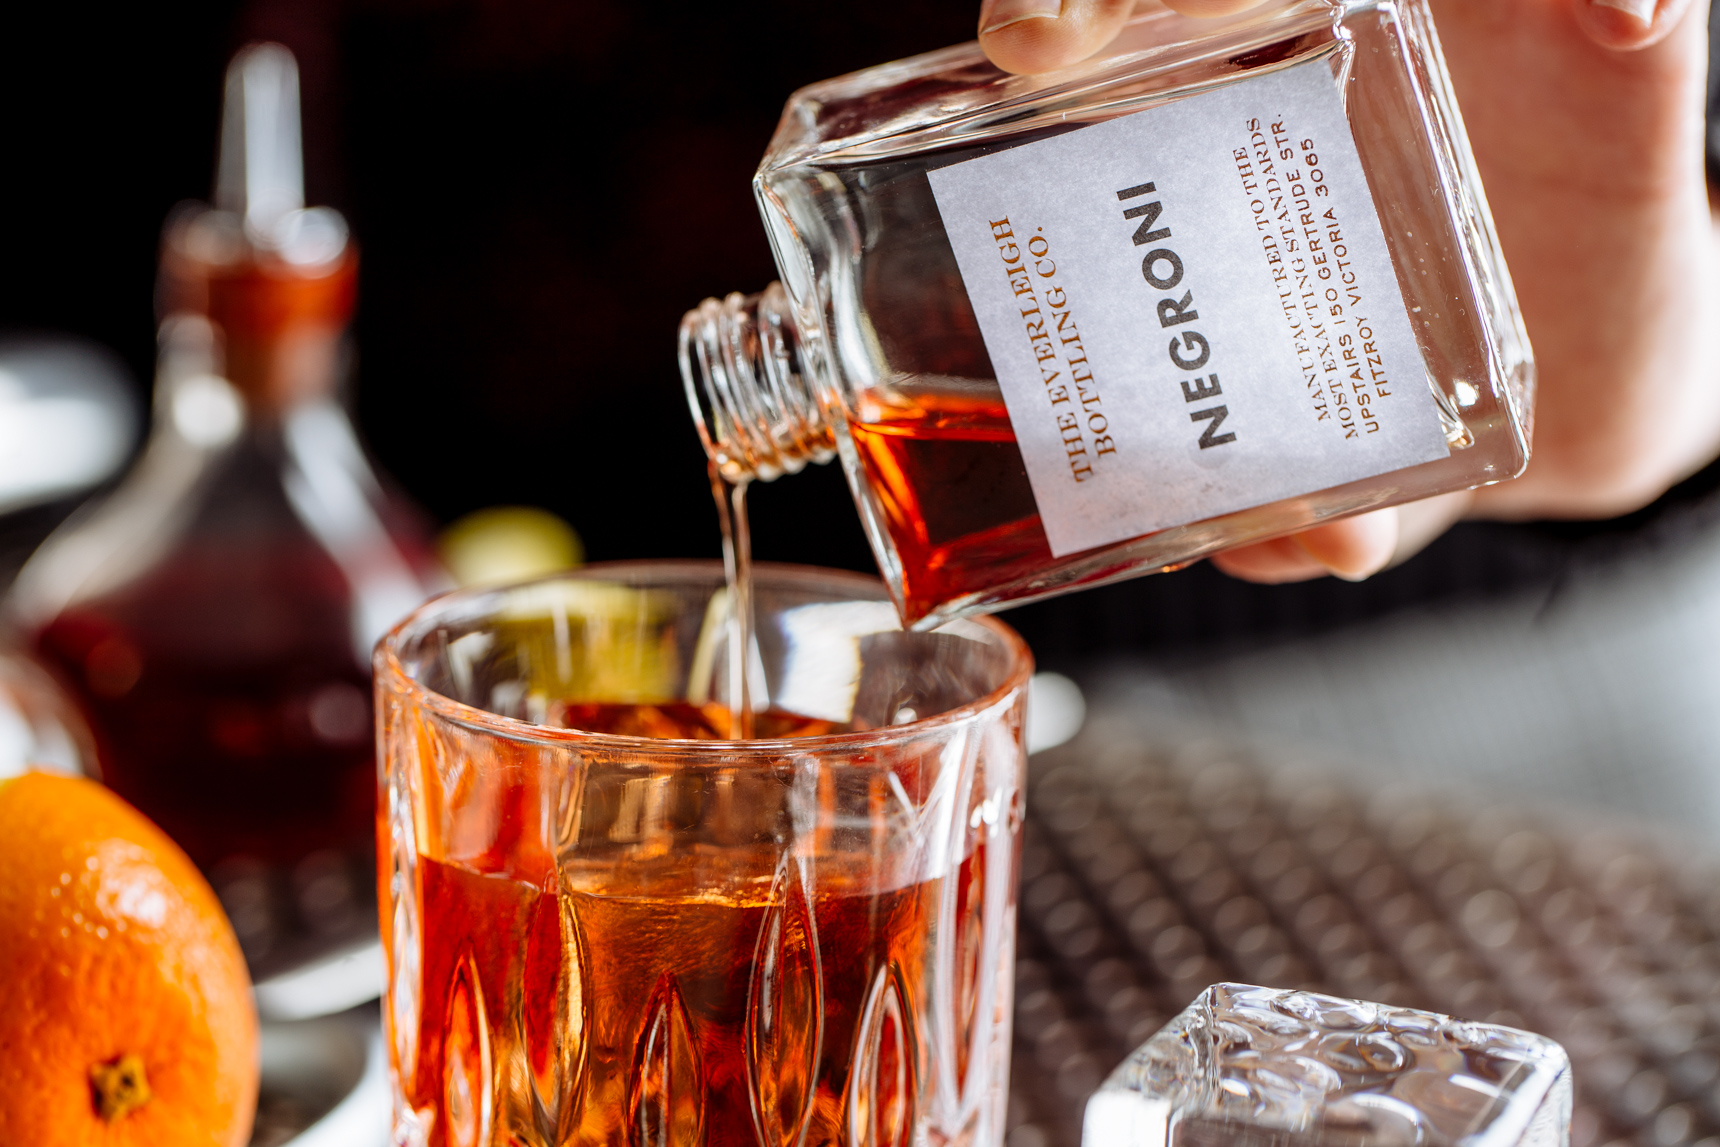 Everleigh Bottling Co Negroni | Photography by Tim Grey
